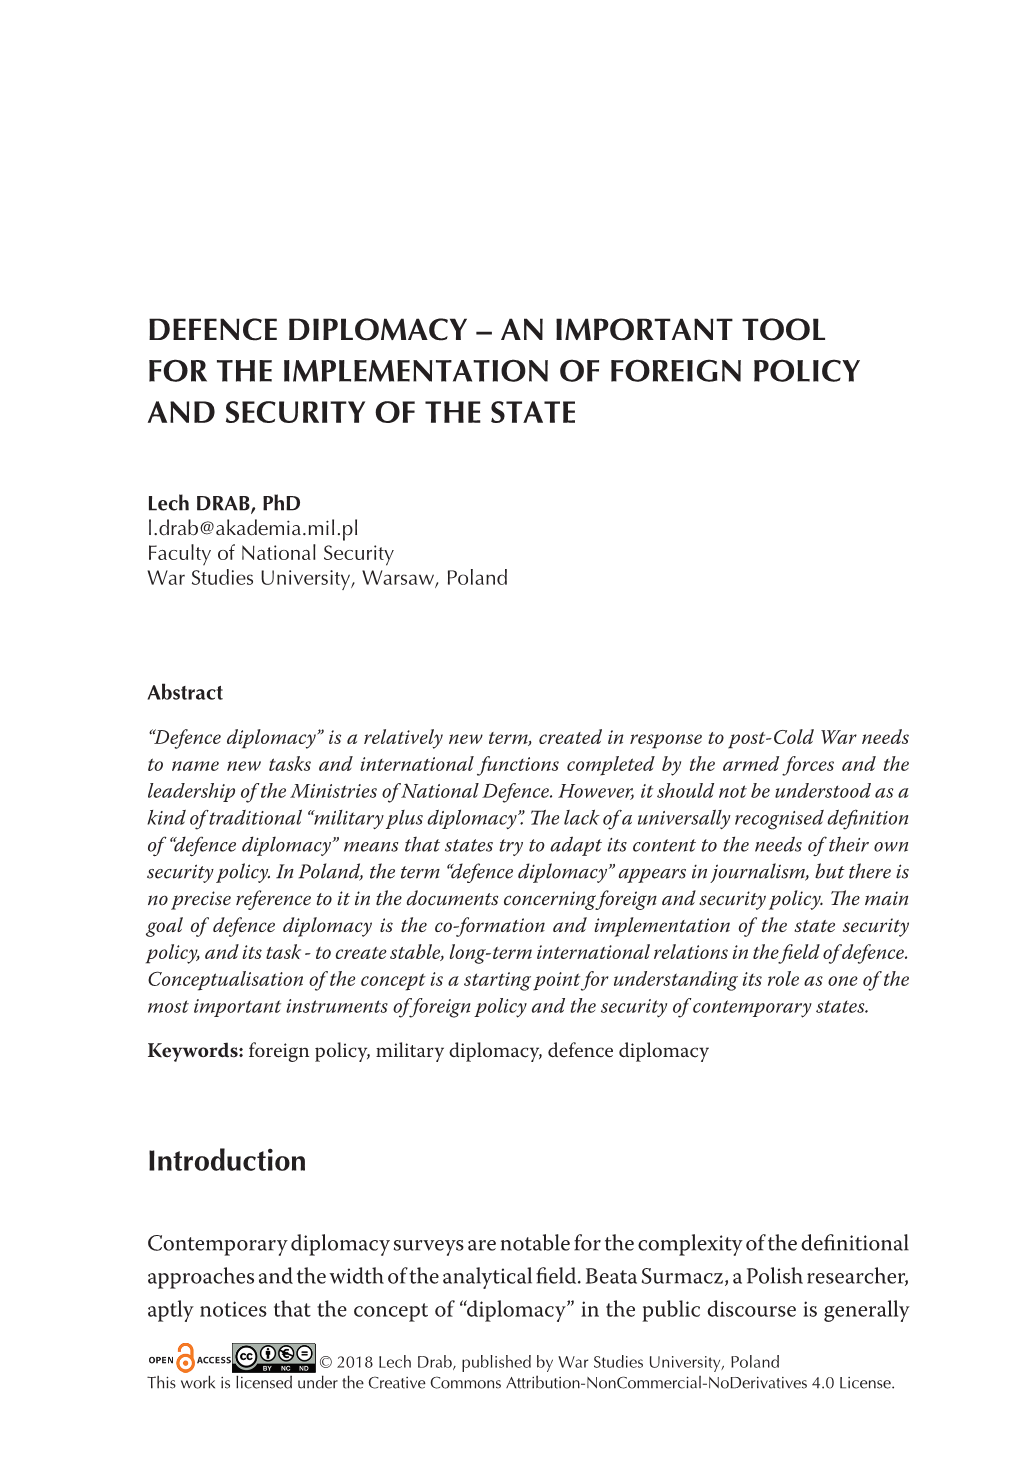 Defence Diplomacy – an Important Tool for the Implementation of Foreign Policy and Security of the State